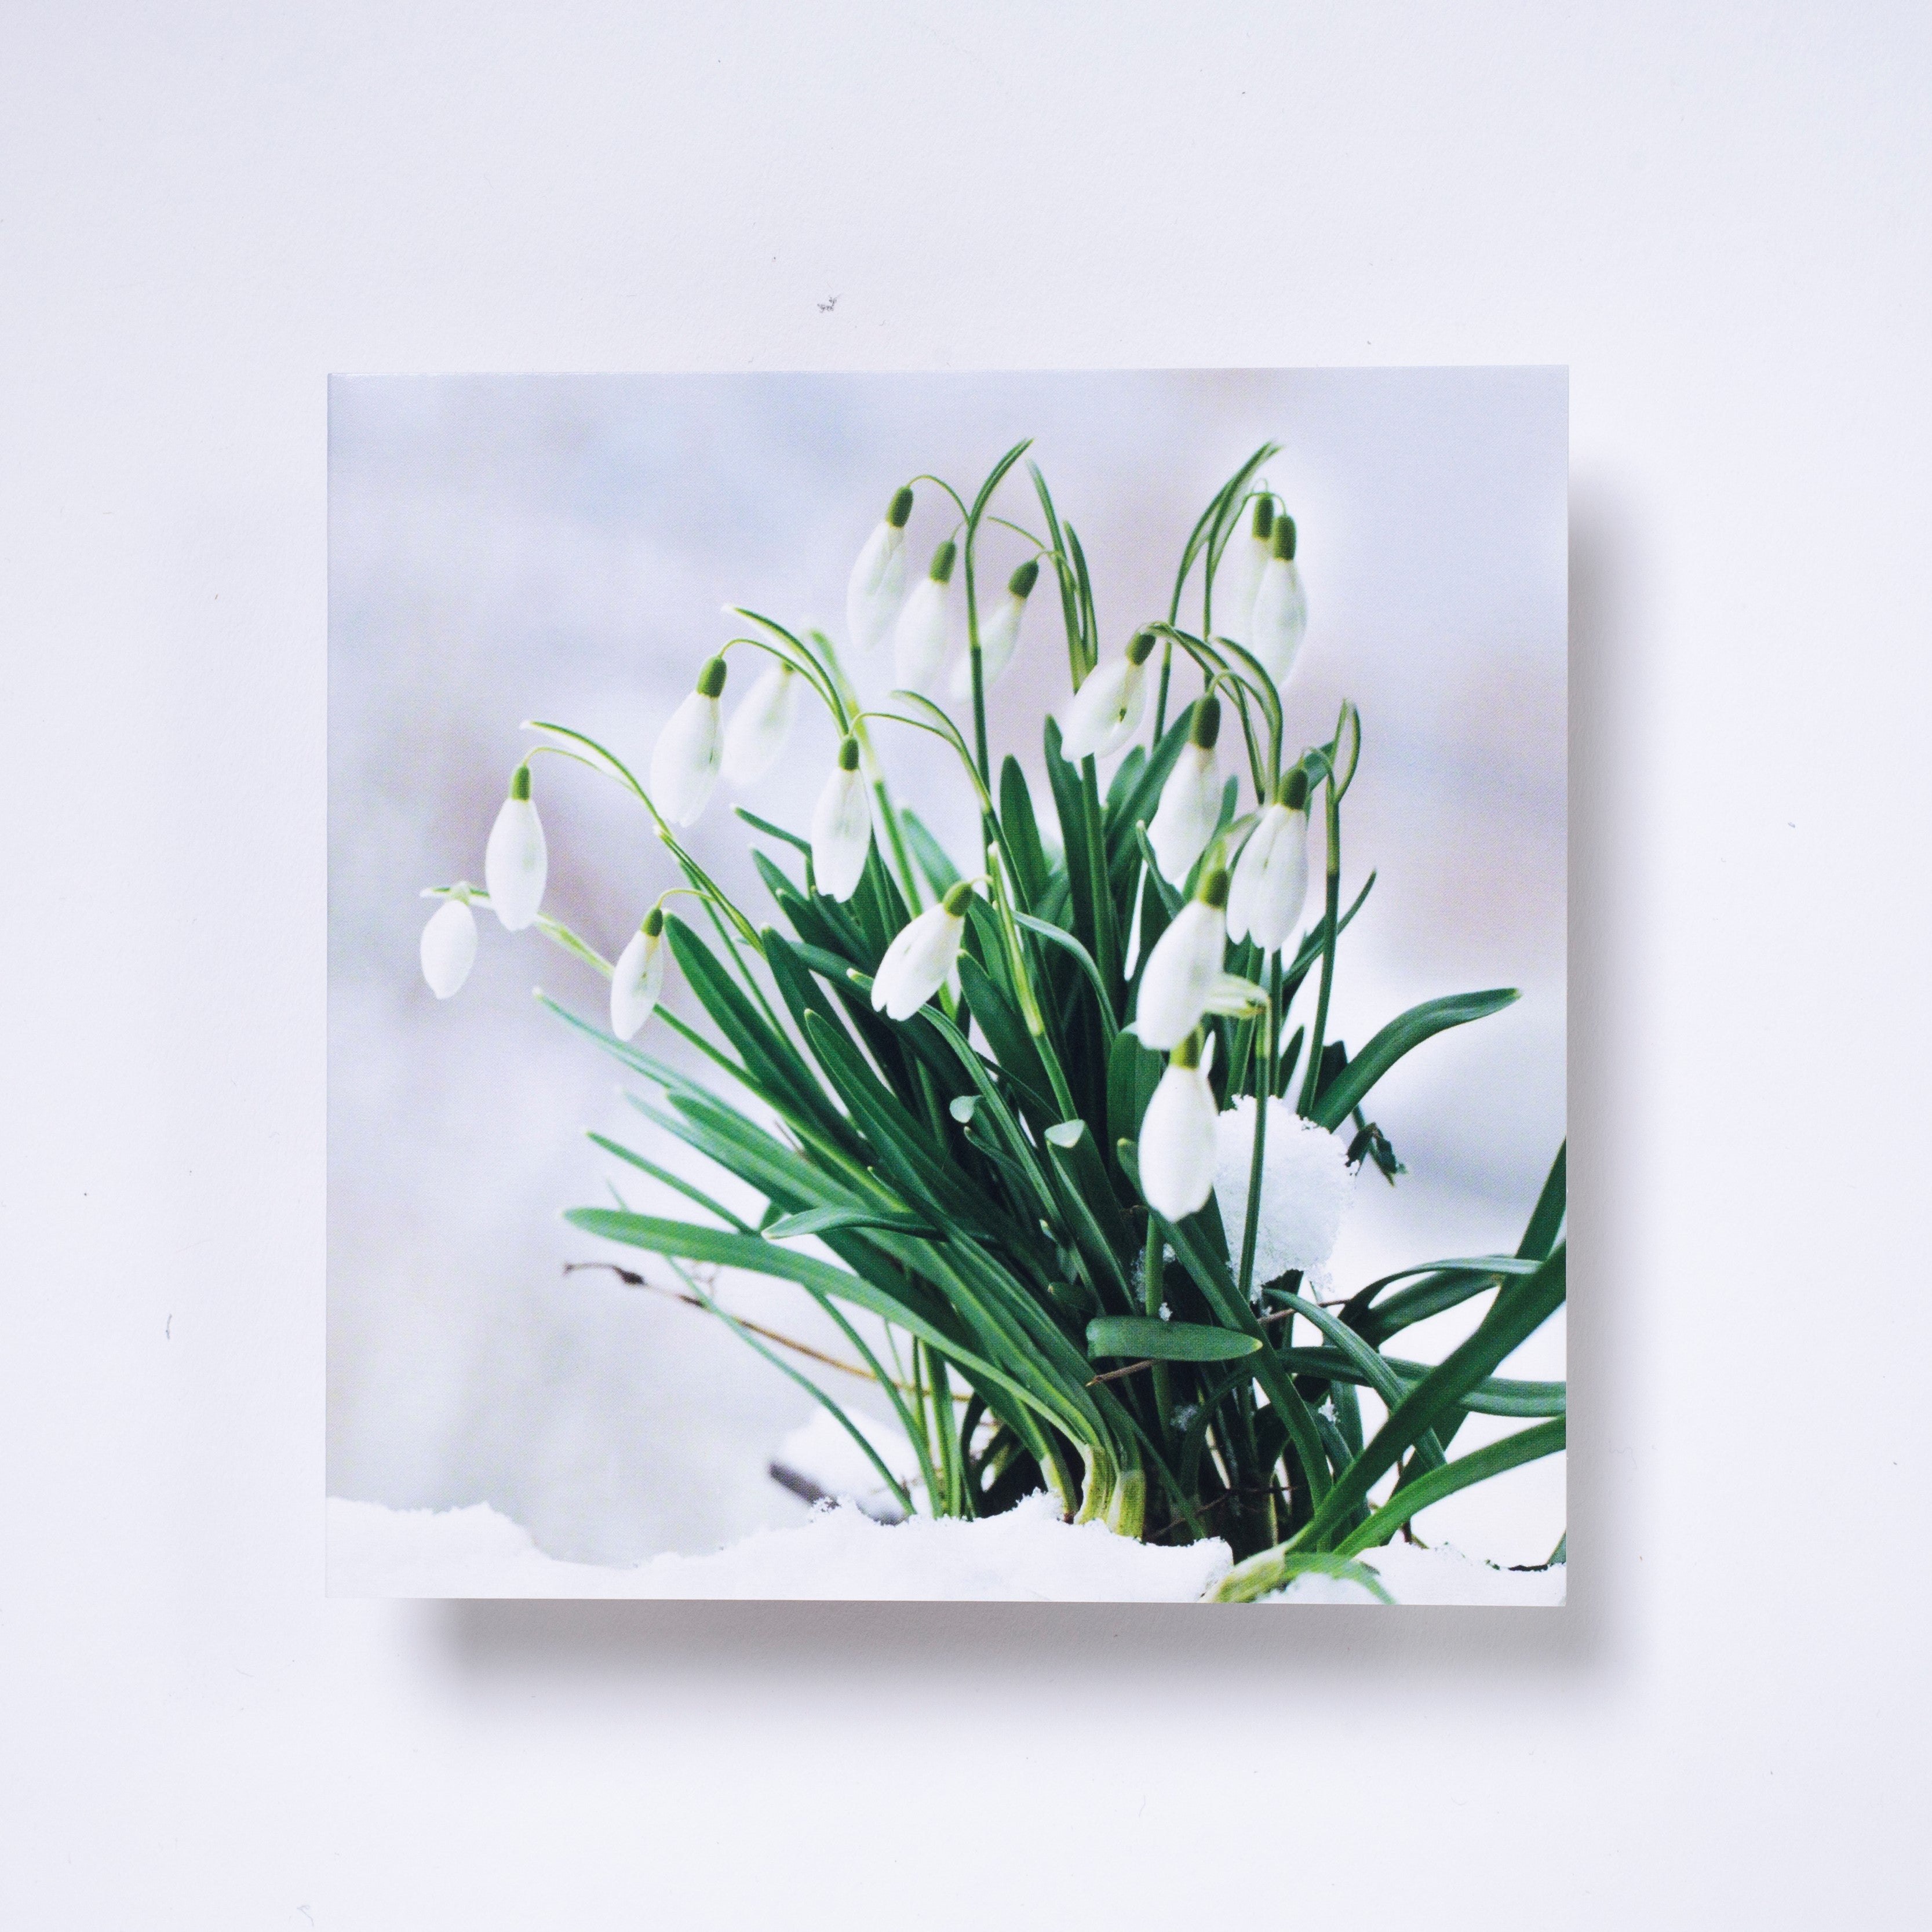 Snowdrops - pack of 10 charity Christmas cards with envelopes